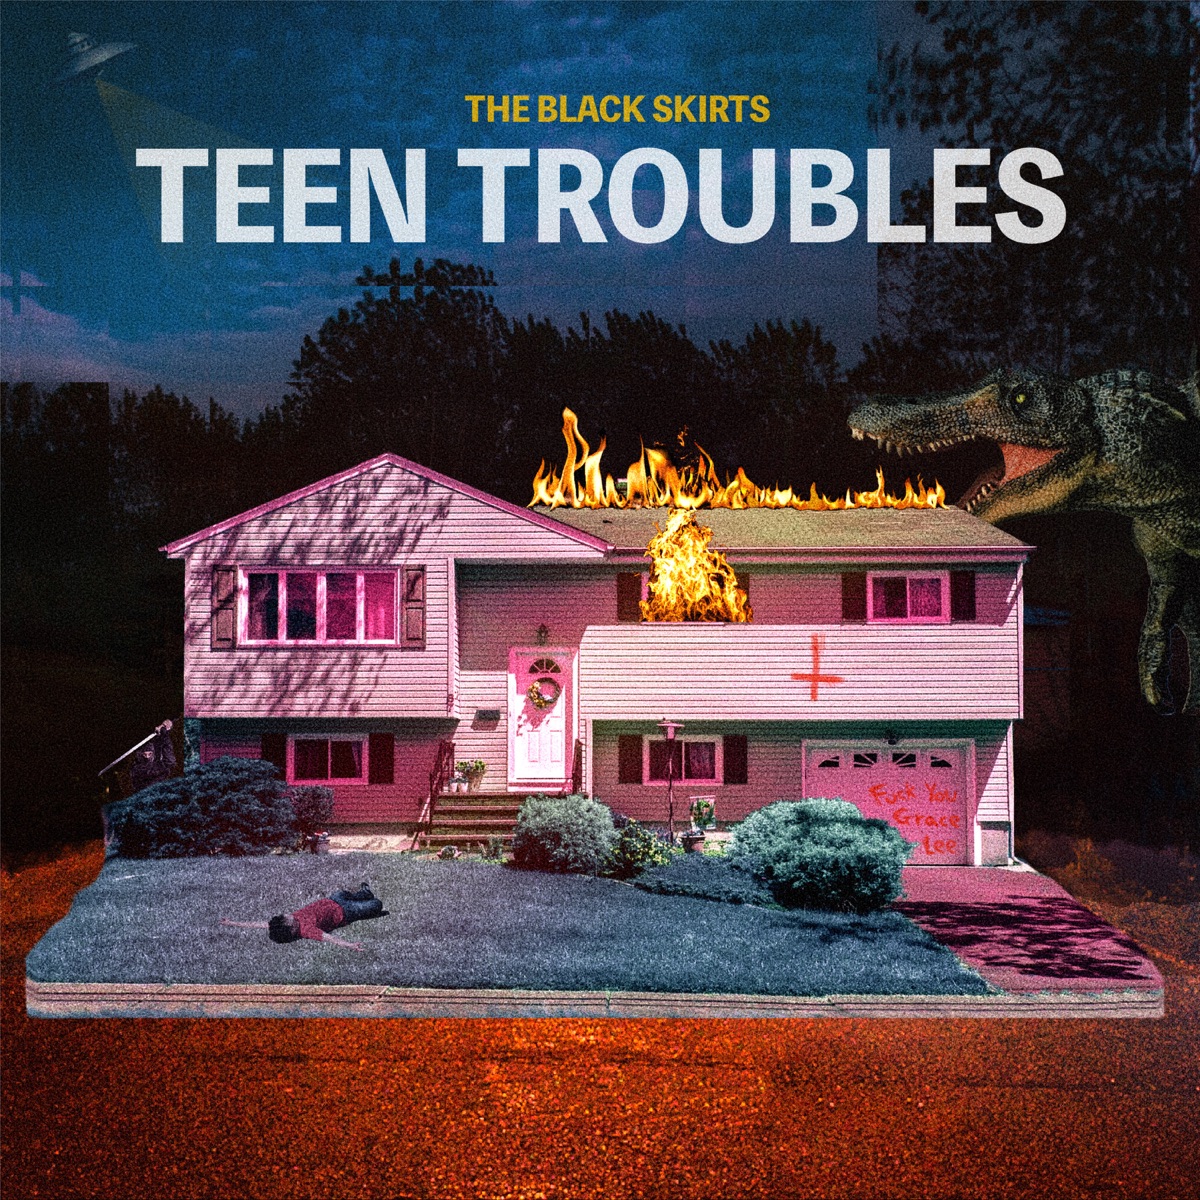 The Black Skirts – TEEN TROUBLES